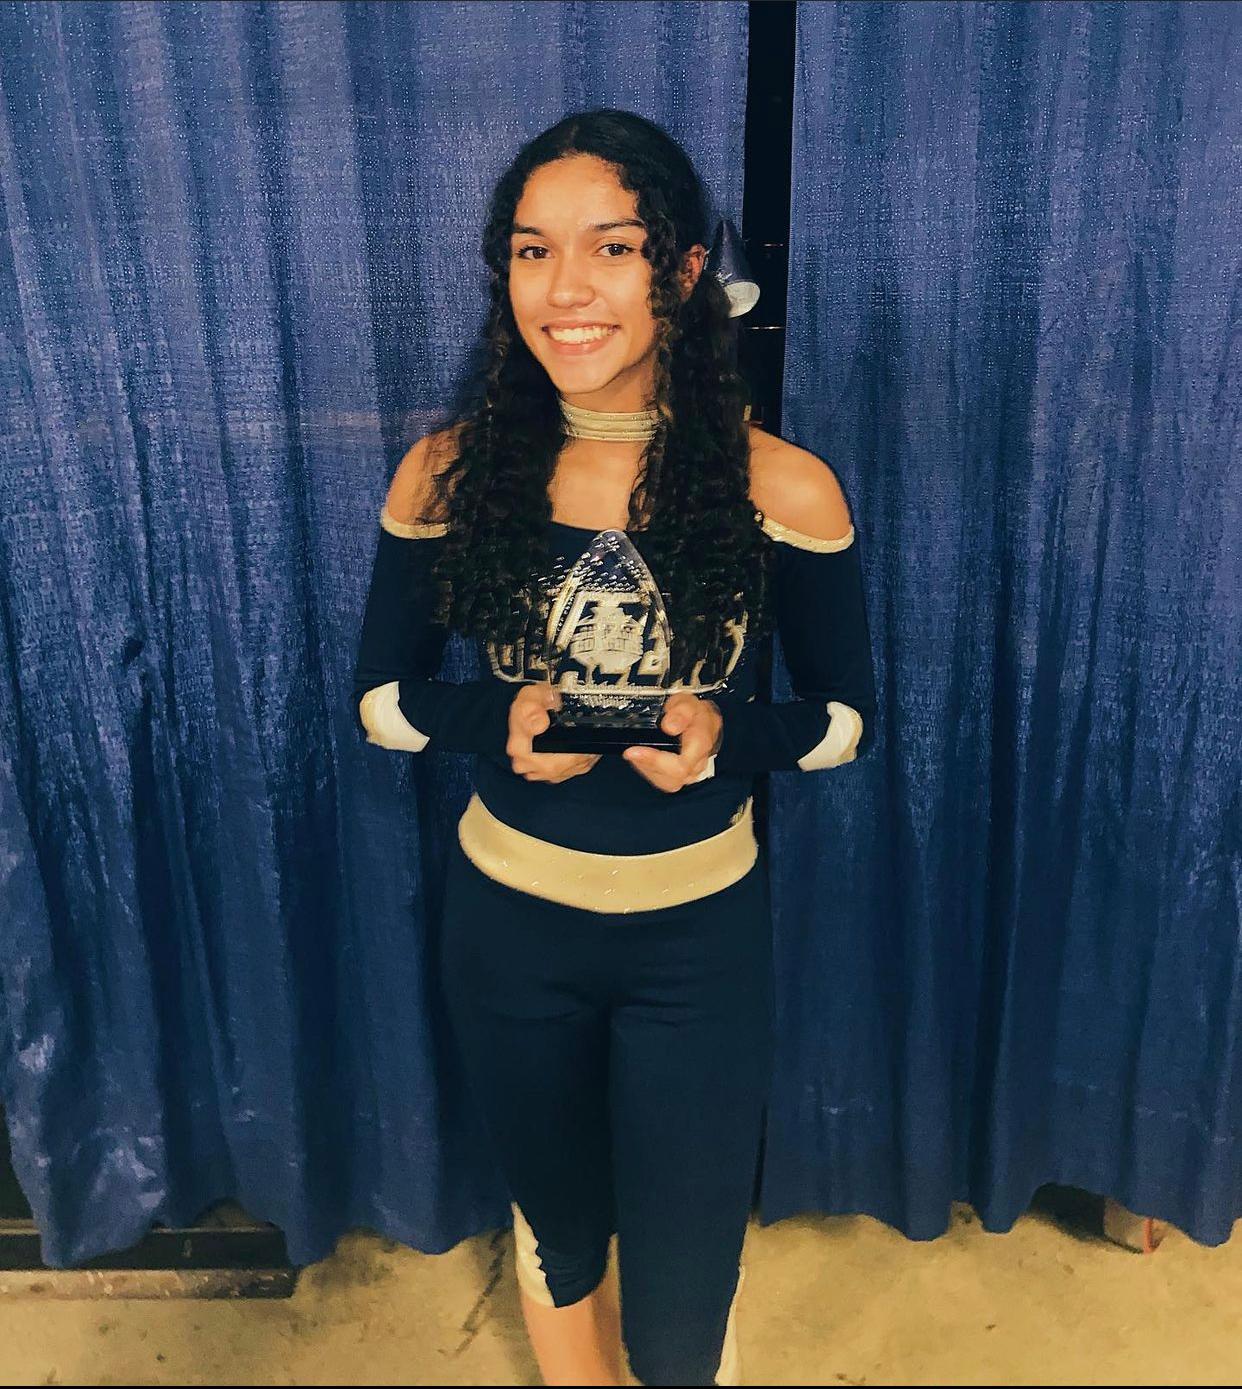 Addison Trail senior earns first place in Illinois Cheerleading Coaches Association (ICCA) Scholarship program